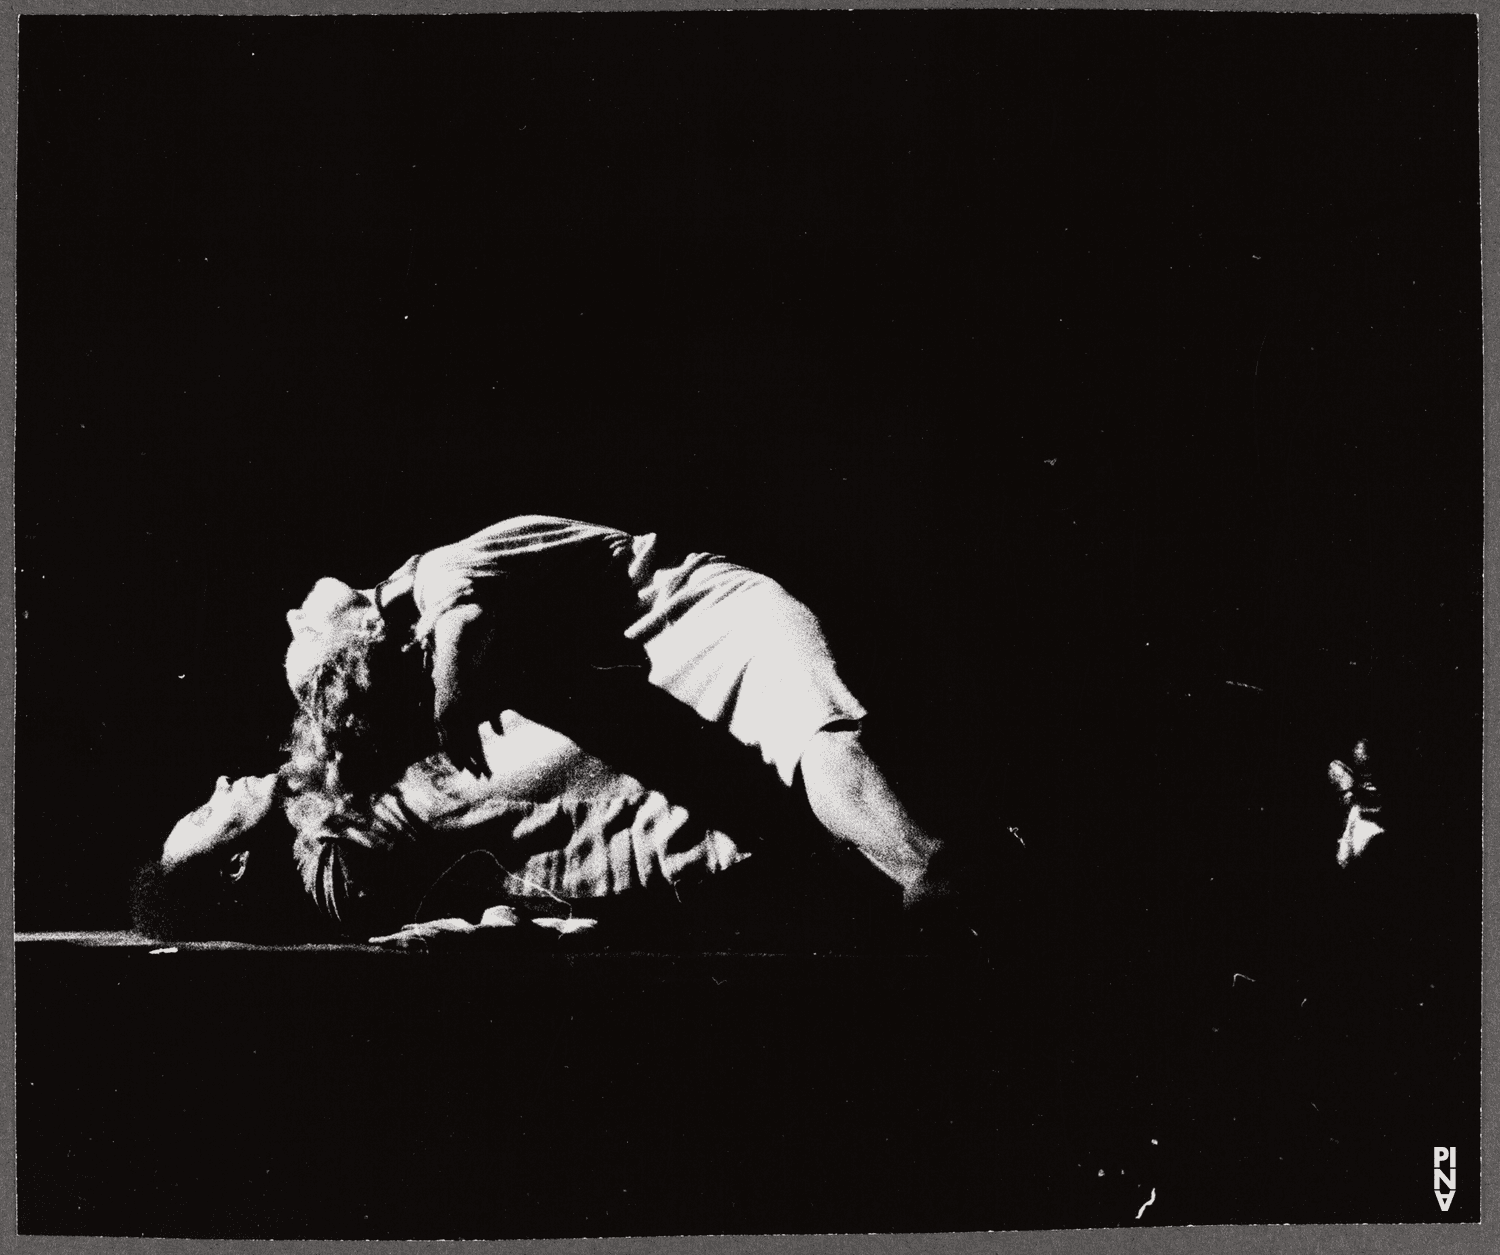 Carlos Orta and Vivienne Newport in “Wiegenlied” by Pina Bausch